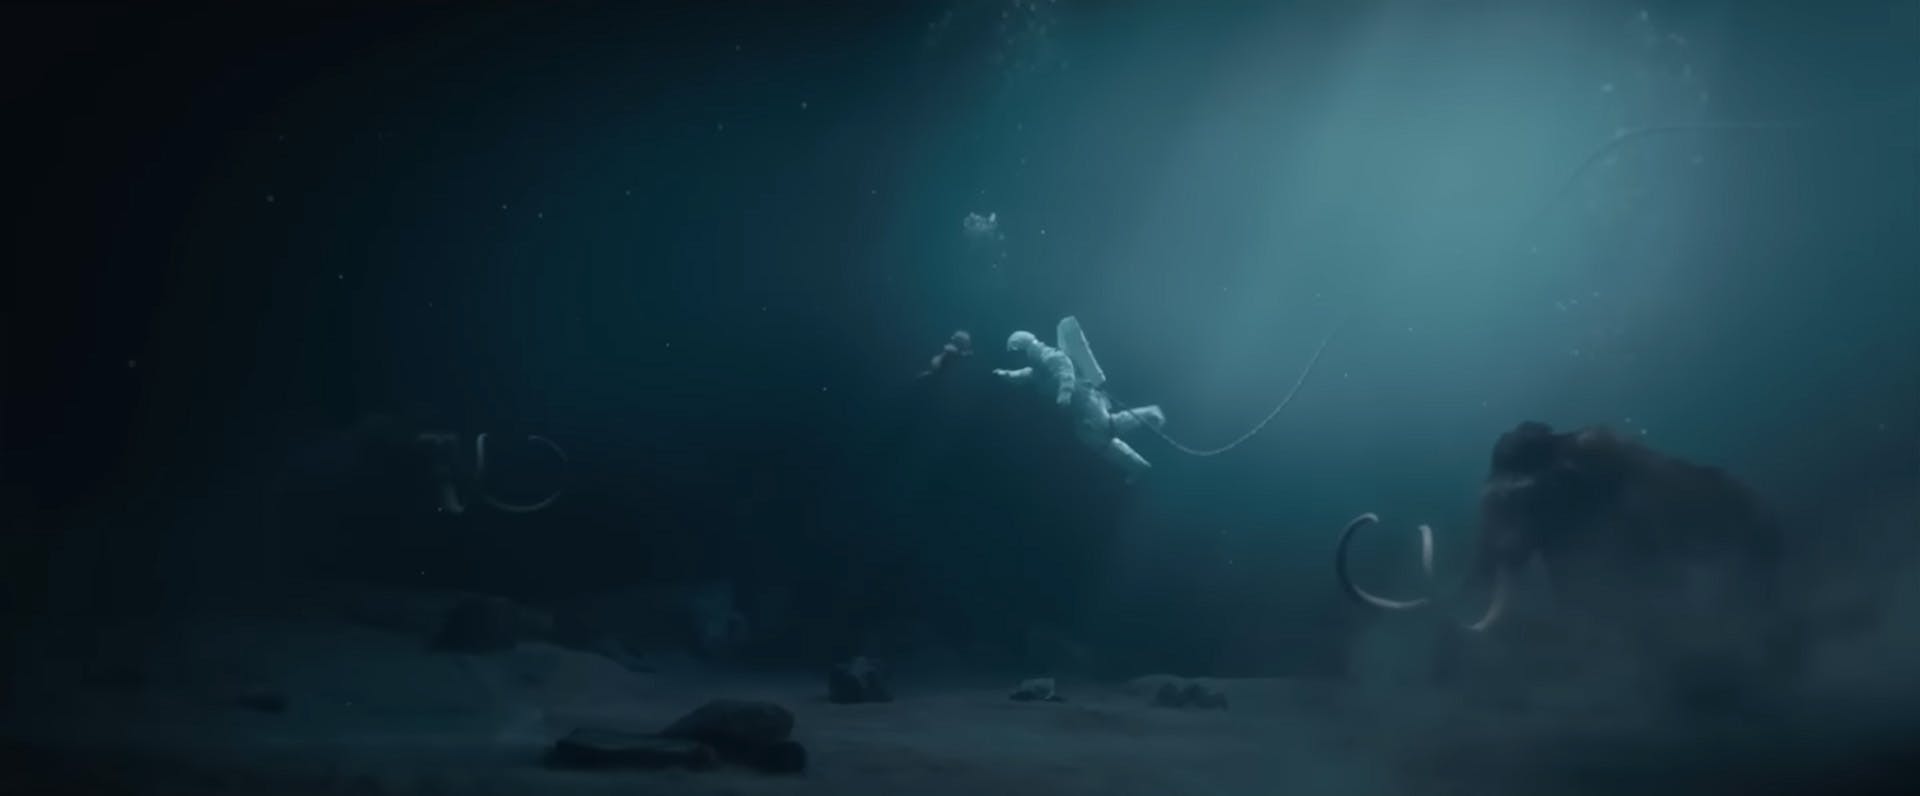 Still from Royal Ontario Museum's ad showing a baby underwater facing an astronaut